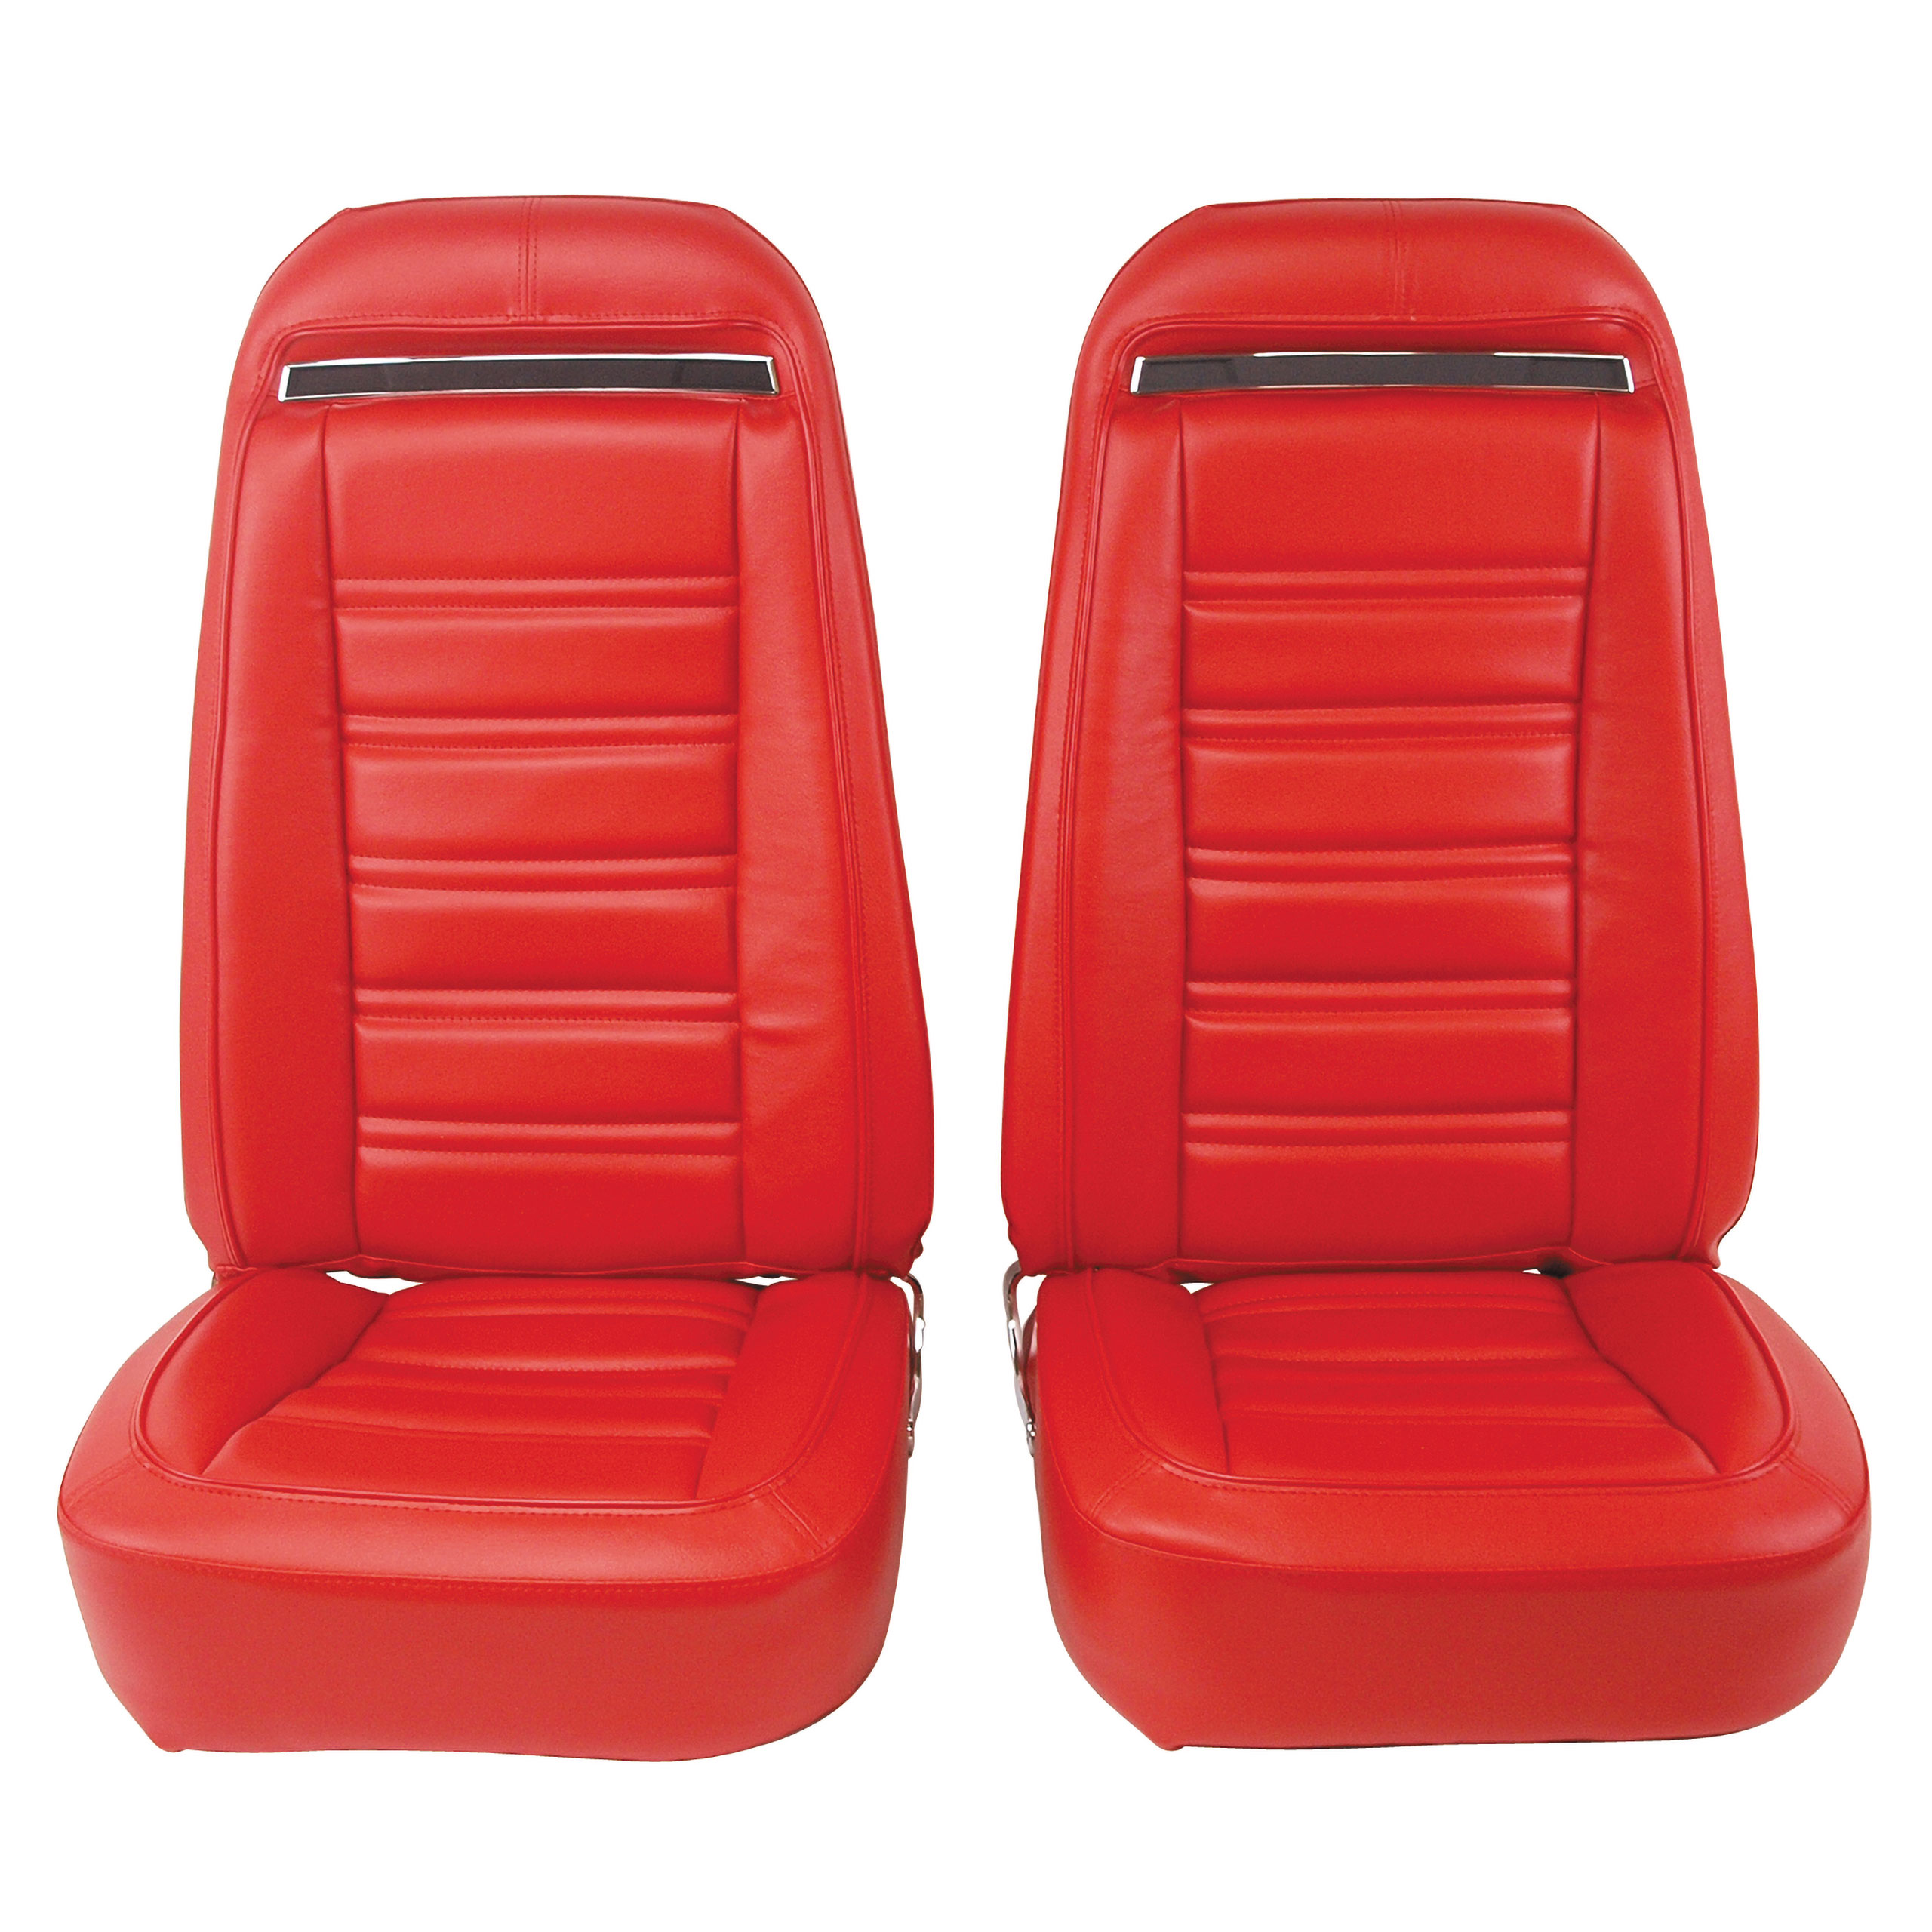 1972 C3 Corvette Mounted Seats Red "Leather-Like" Vinyl Without Shoulder Harness